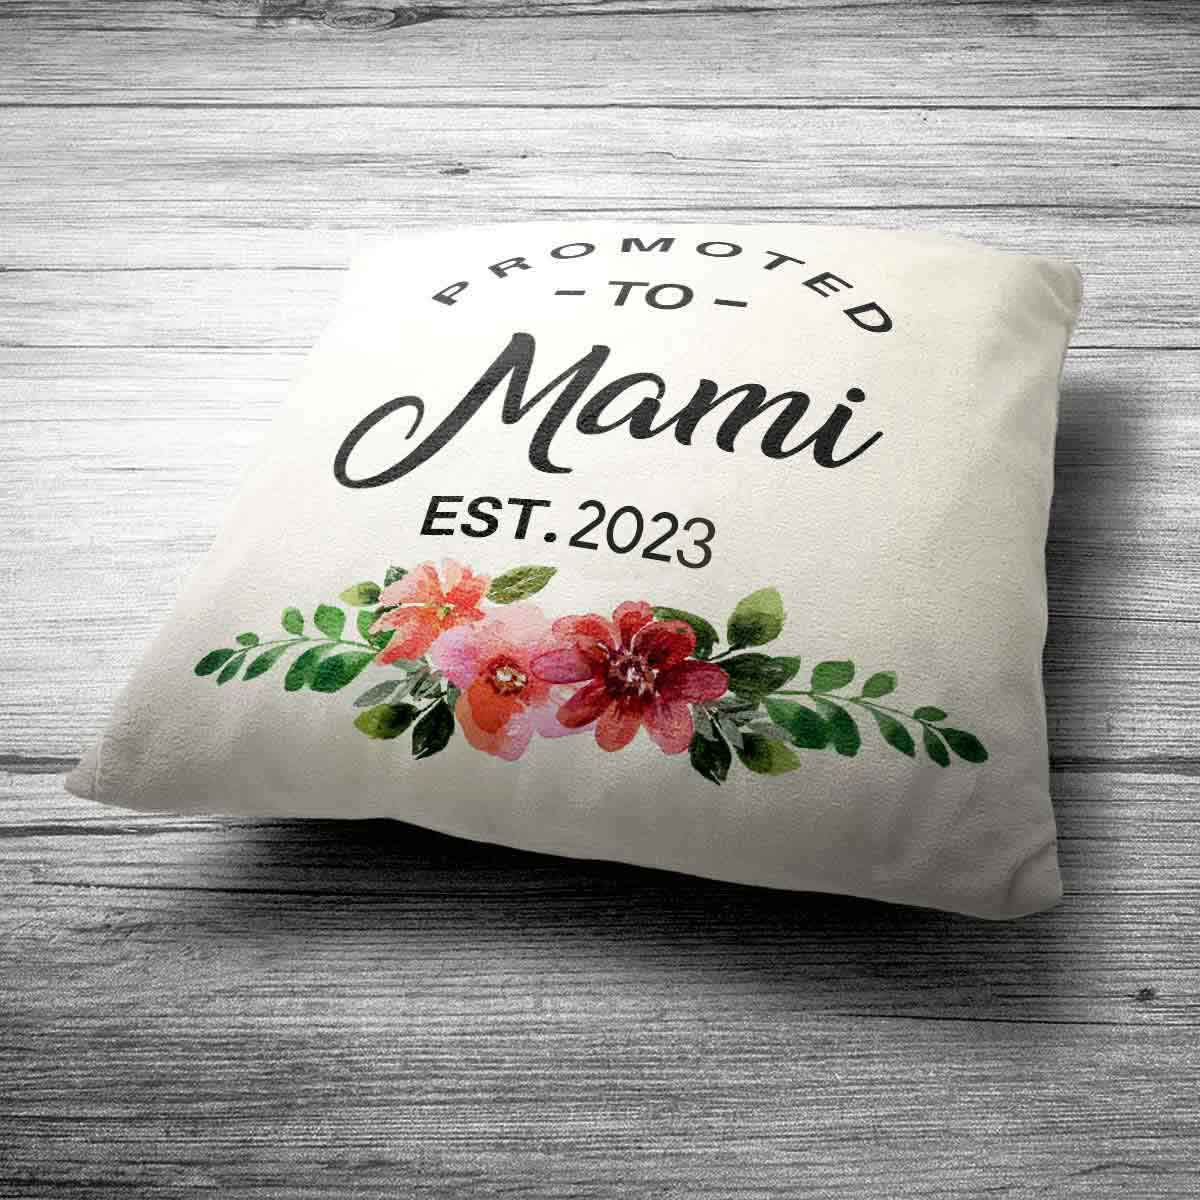 Personalised Promoted to Mami Cushion